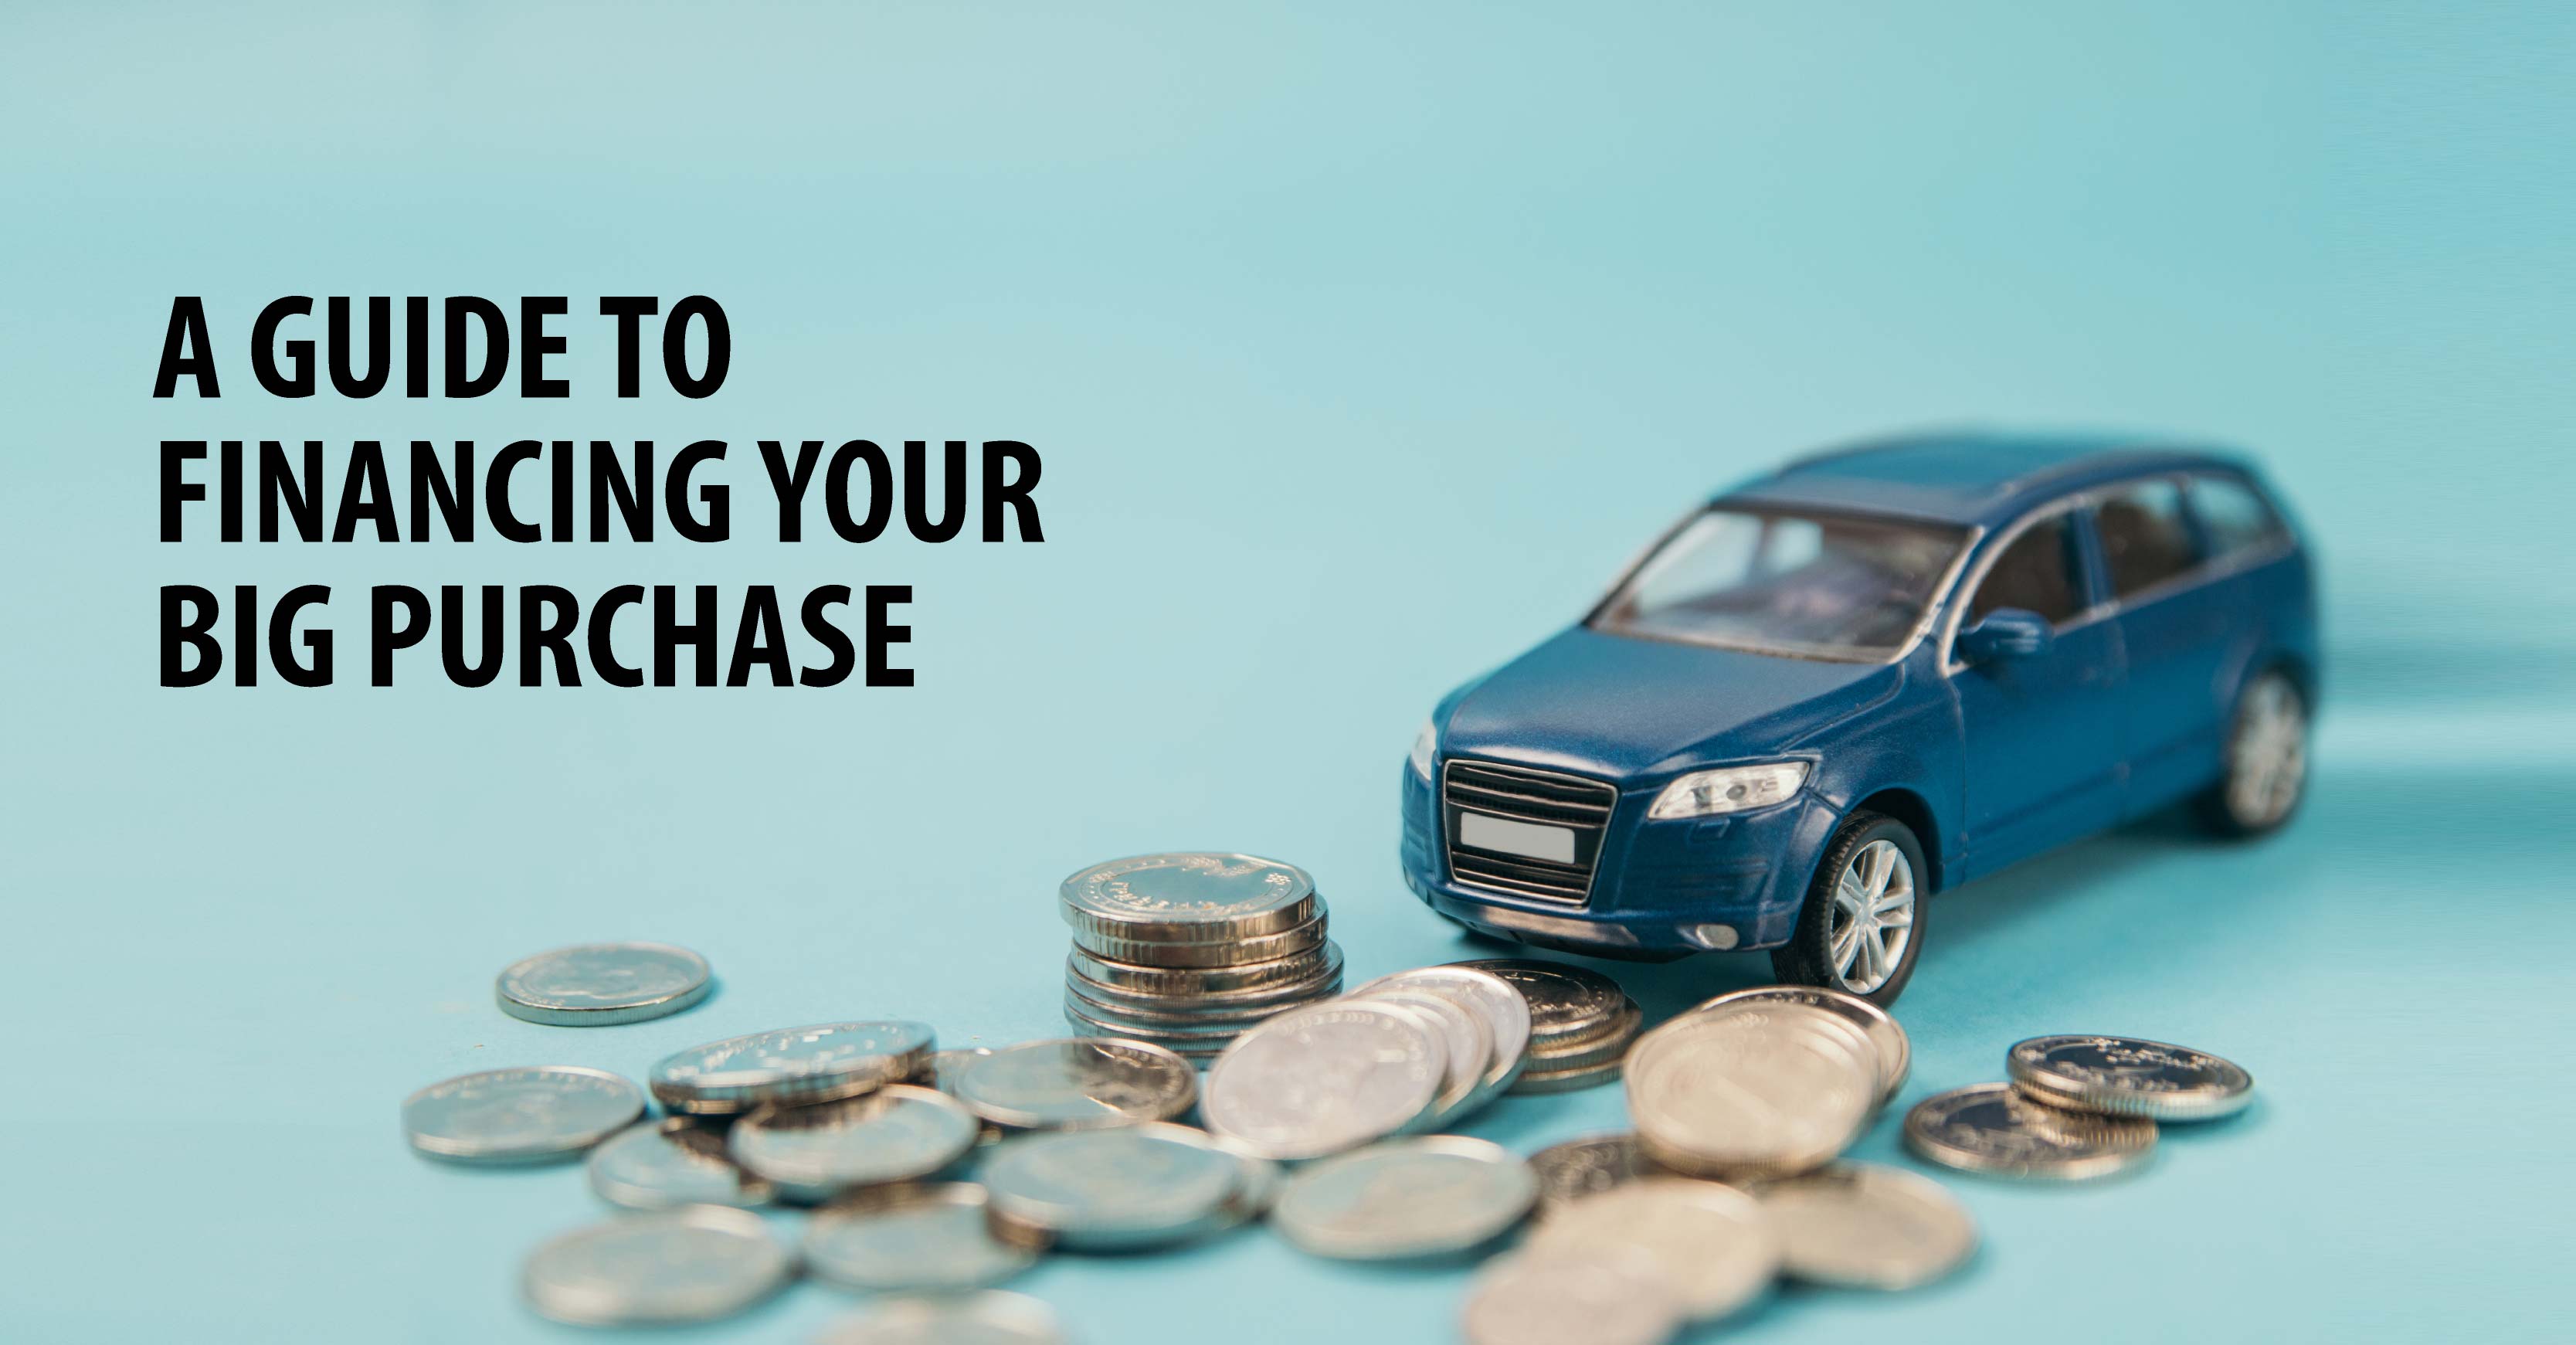 A GUIDE TO FINANCING YOUR BIG PURCHASE